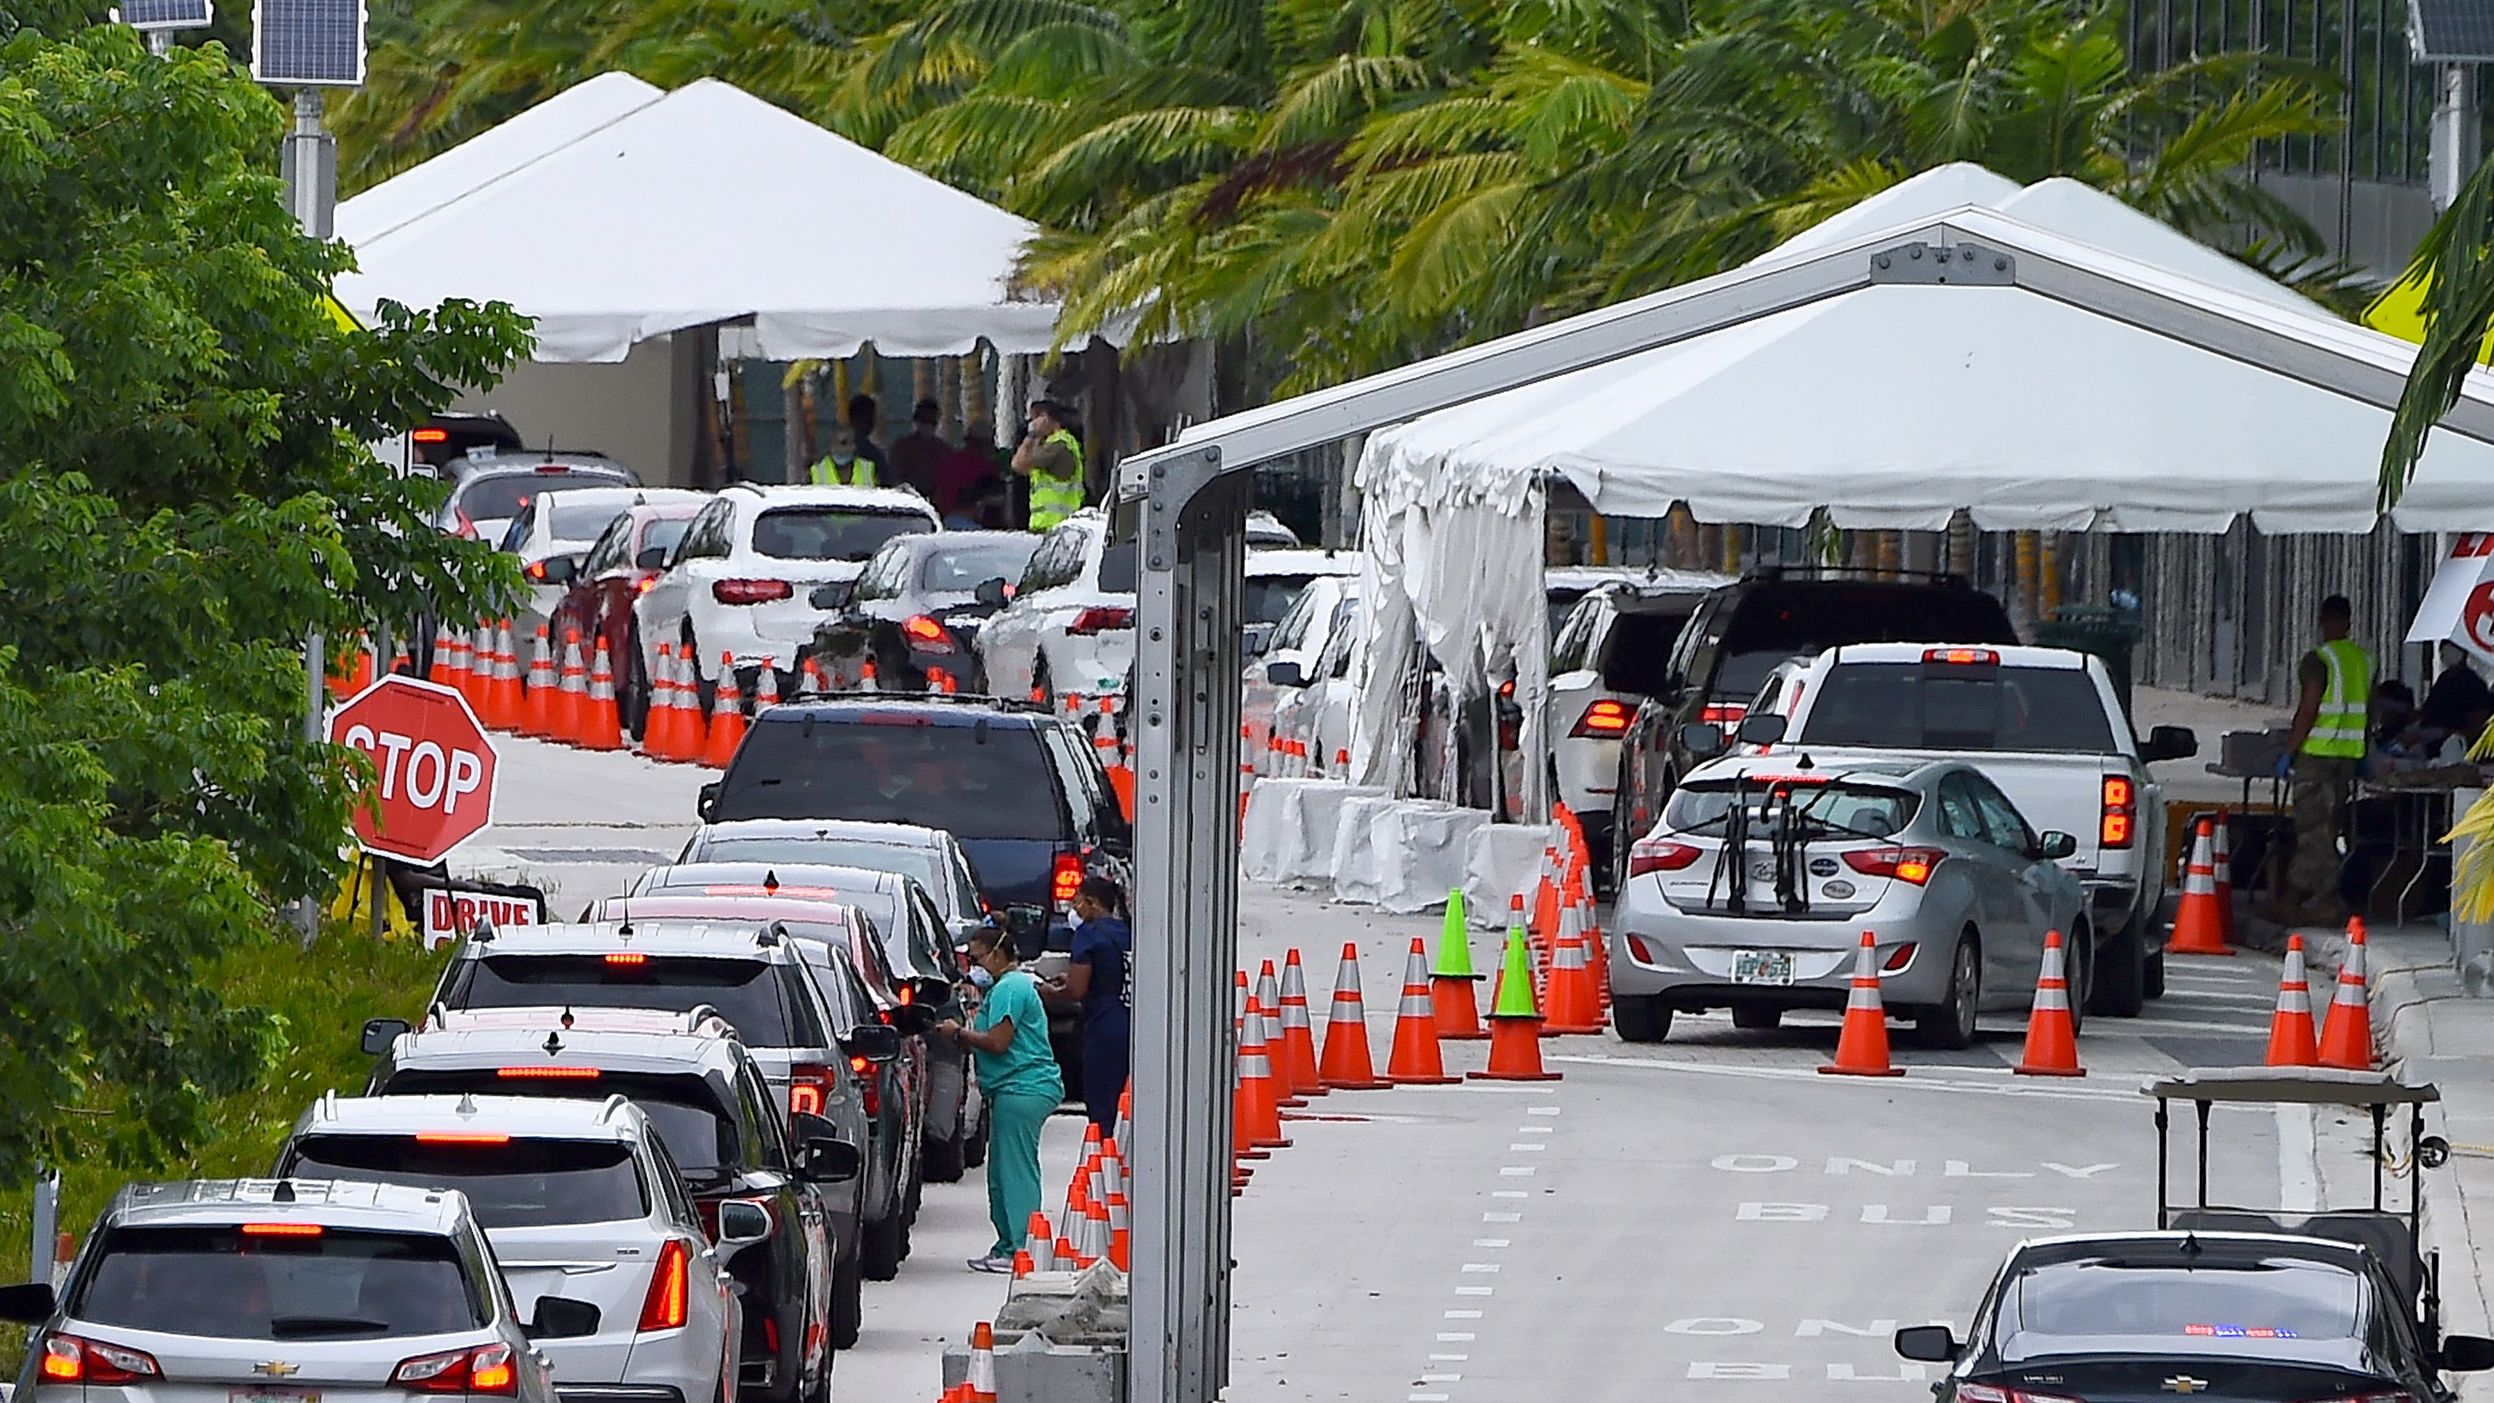 Cars line up for Covid-19 test at a "walk-in" and "drive-through" coronavirus testing site in Miami Beach, Florida on July 22, 2020.